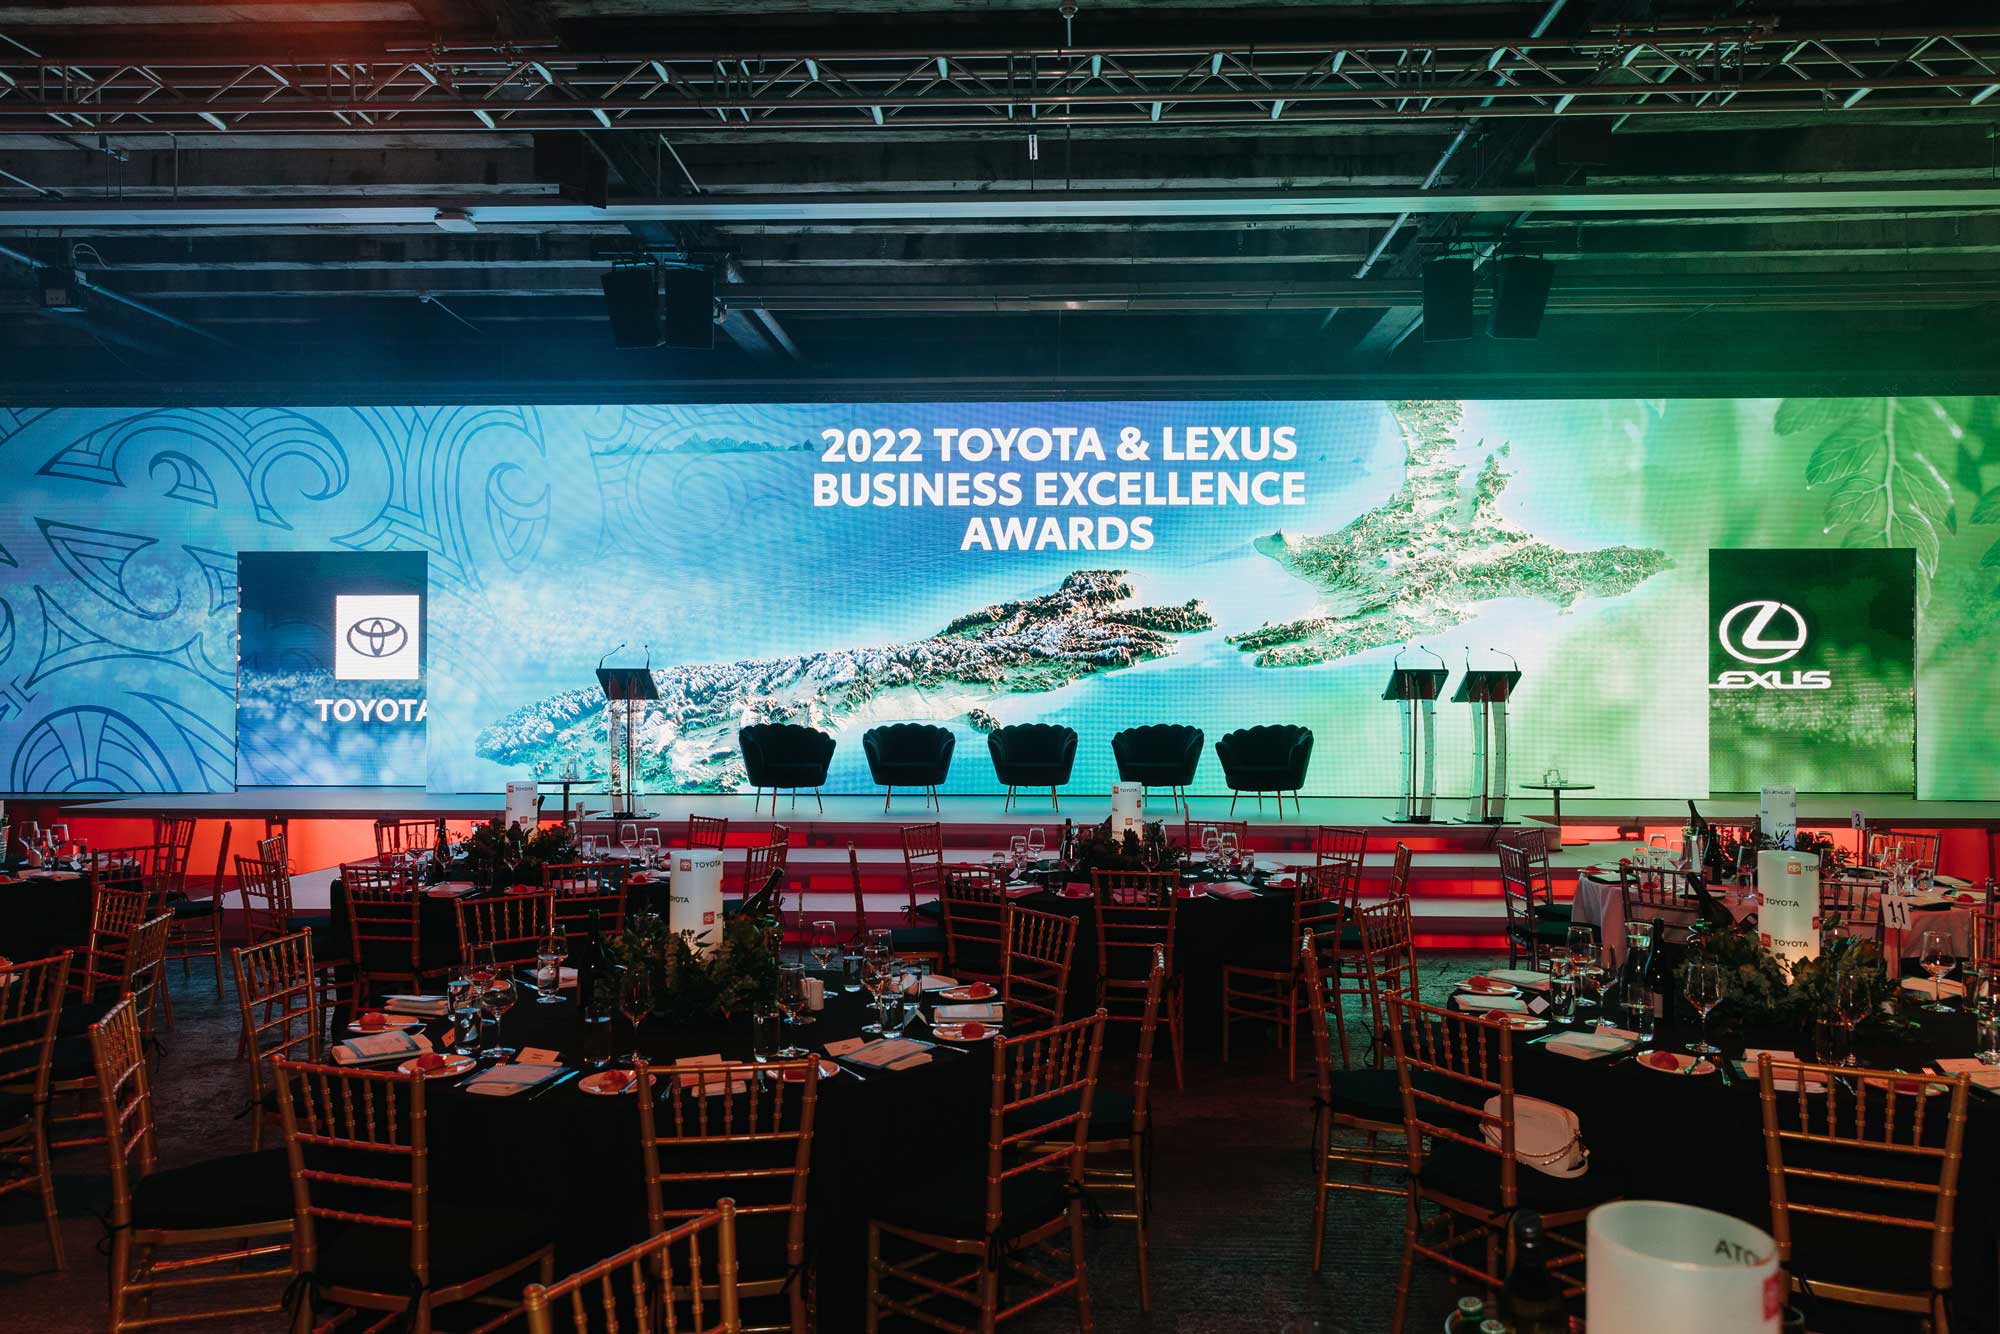 2022 Toyota and Lexus business excellence awards. At Shed 10, Auckland. Photo by Sarah Weber Photography